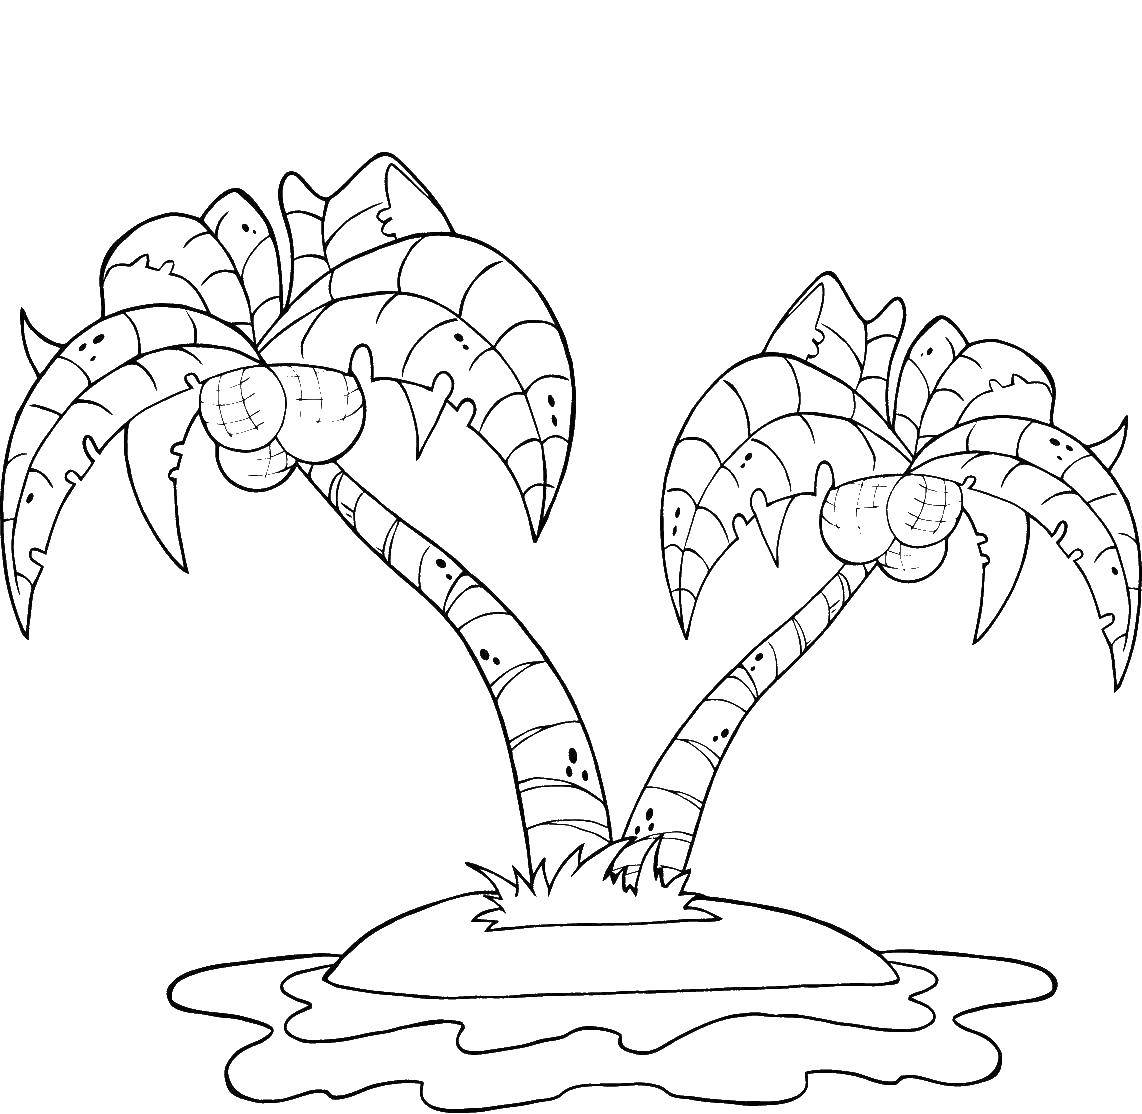 Coloring Island with palm trees. Category island. Tags:  island, palm trees.